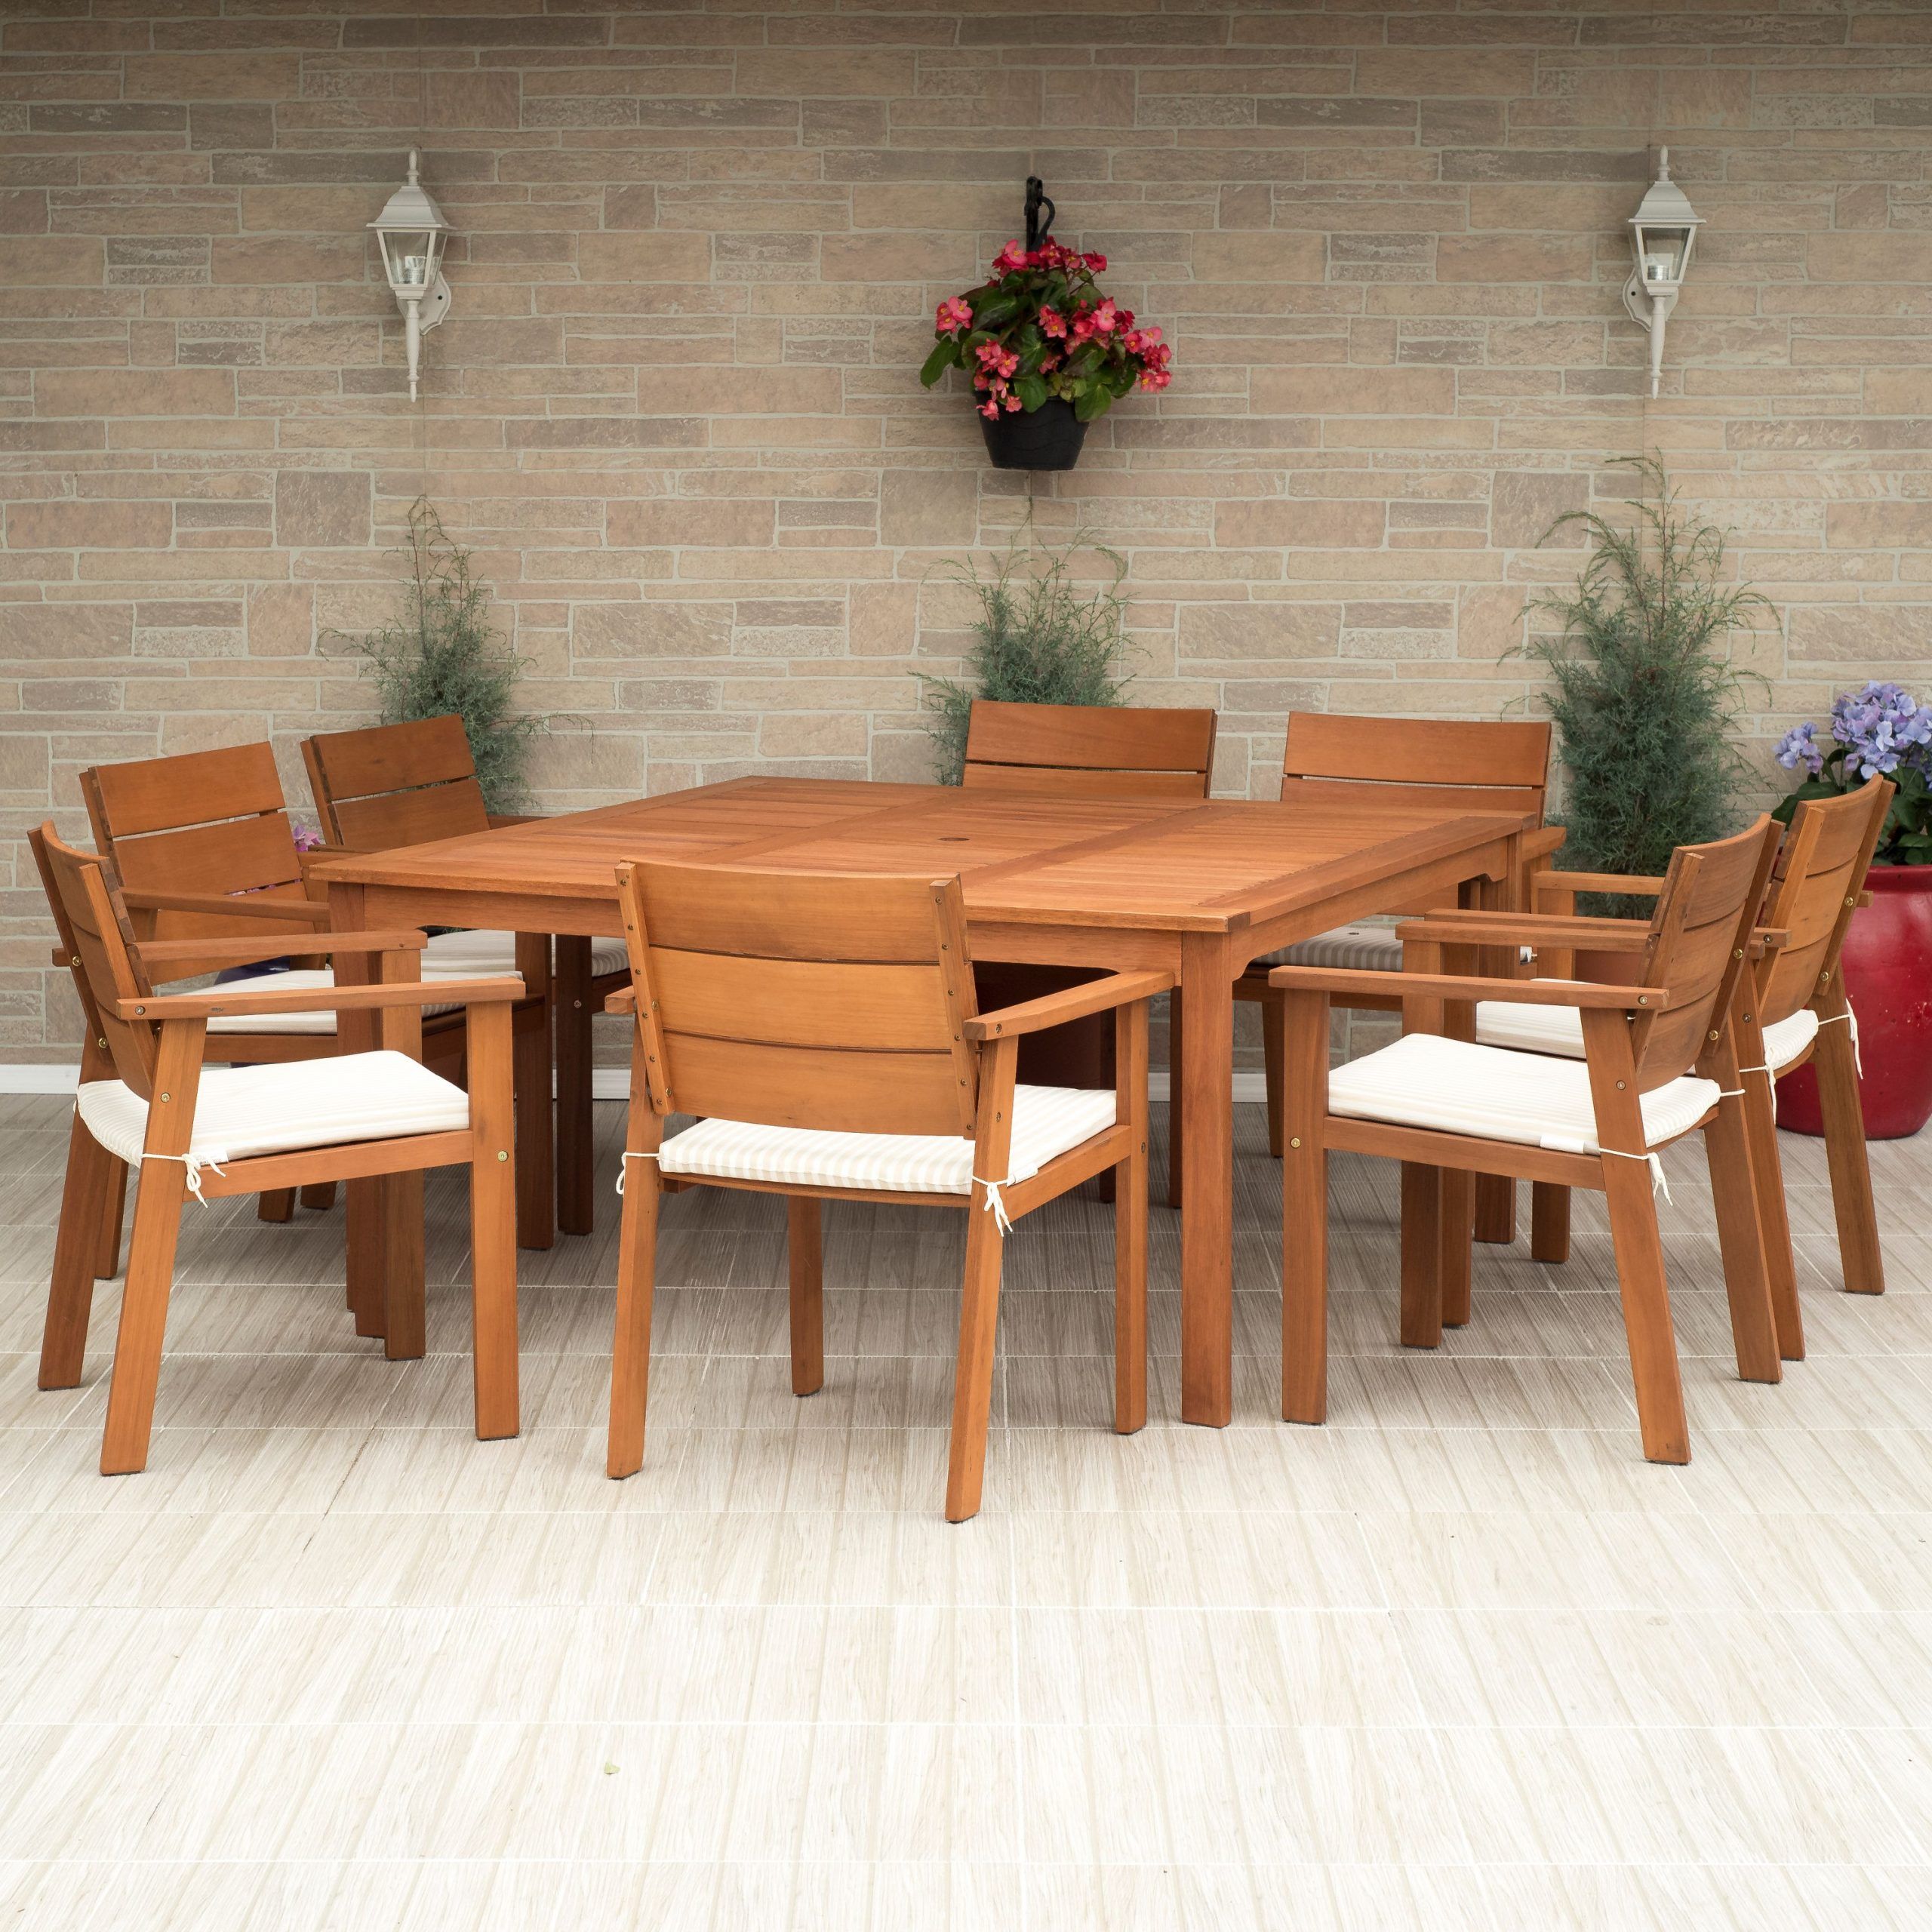 Eucalyptus Wood Intended For Famous 9 Piece Square Patio Dining Sets (View 4 of 15)